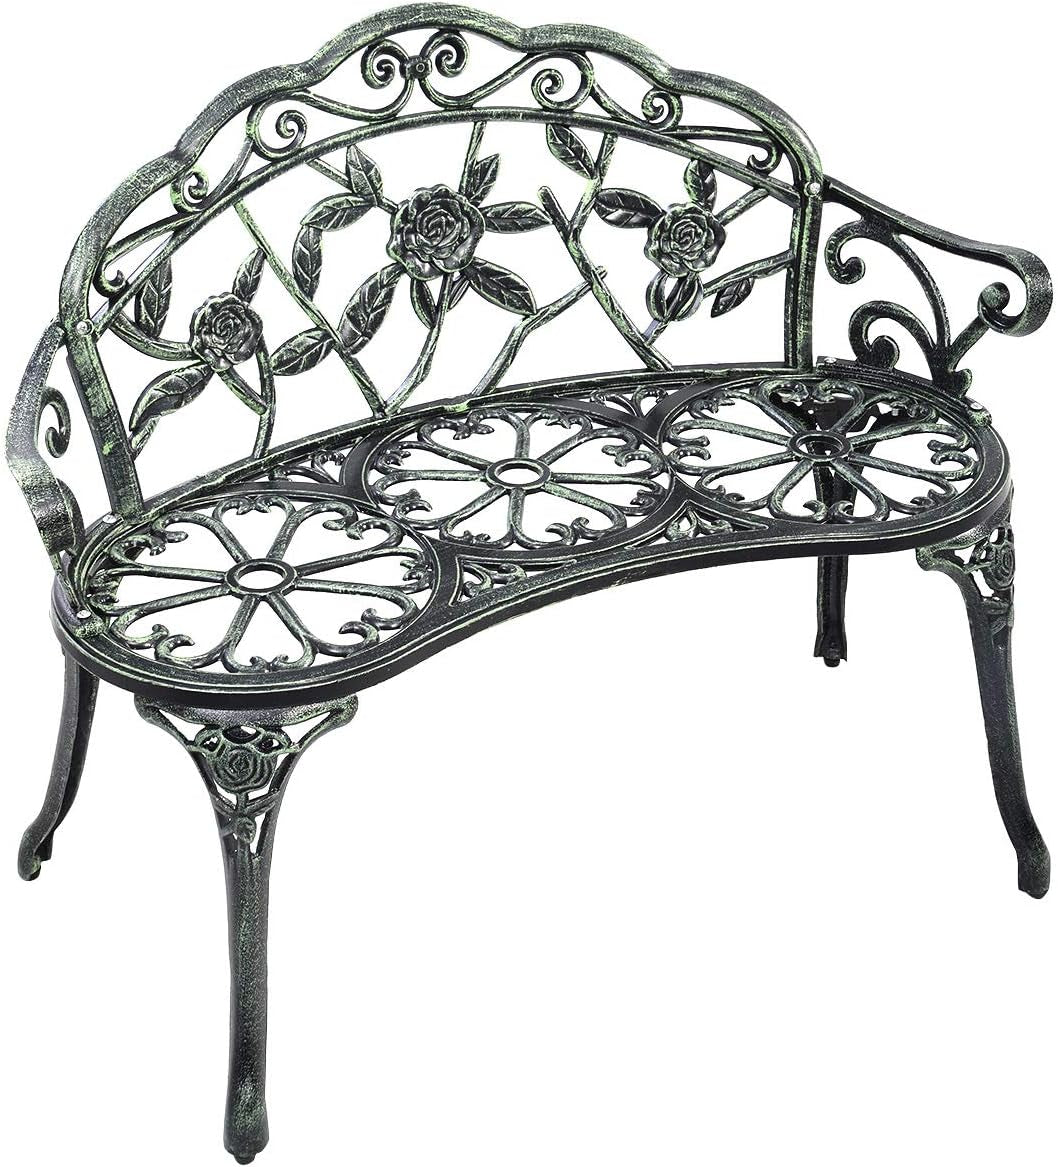 Giantex Outdoor Garden Bench Iron Patio Benches for Outdoors, Porch Bench Chair with Curved Legs Cast Aluminum Rose Antique Style, Green